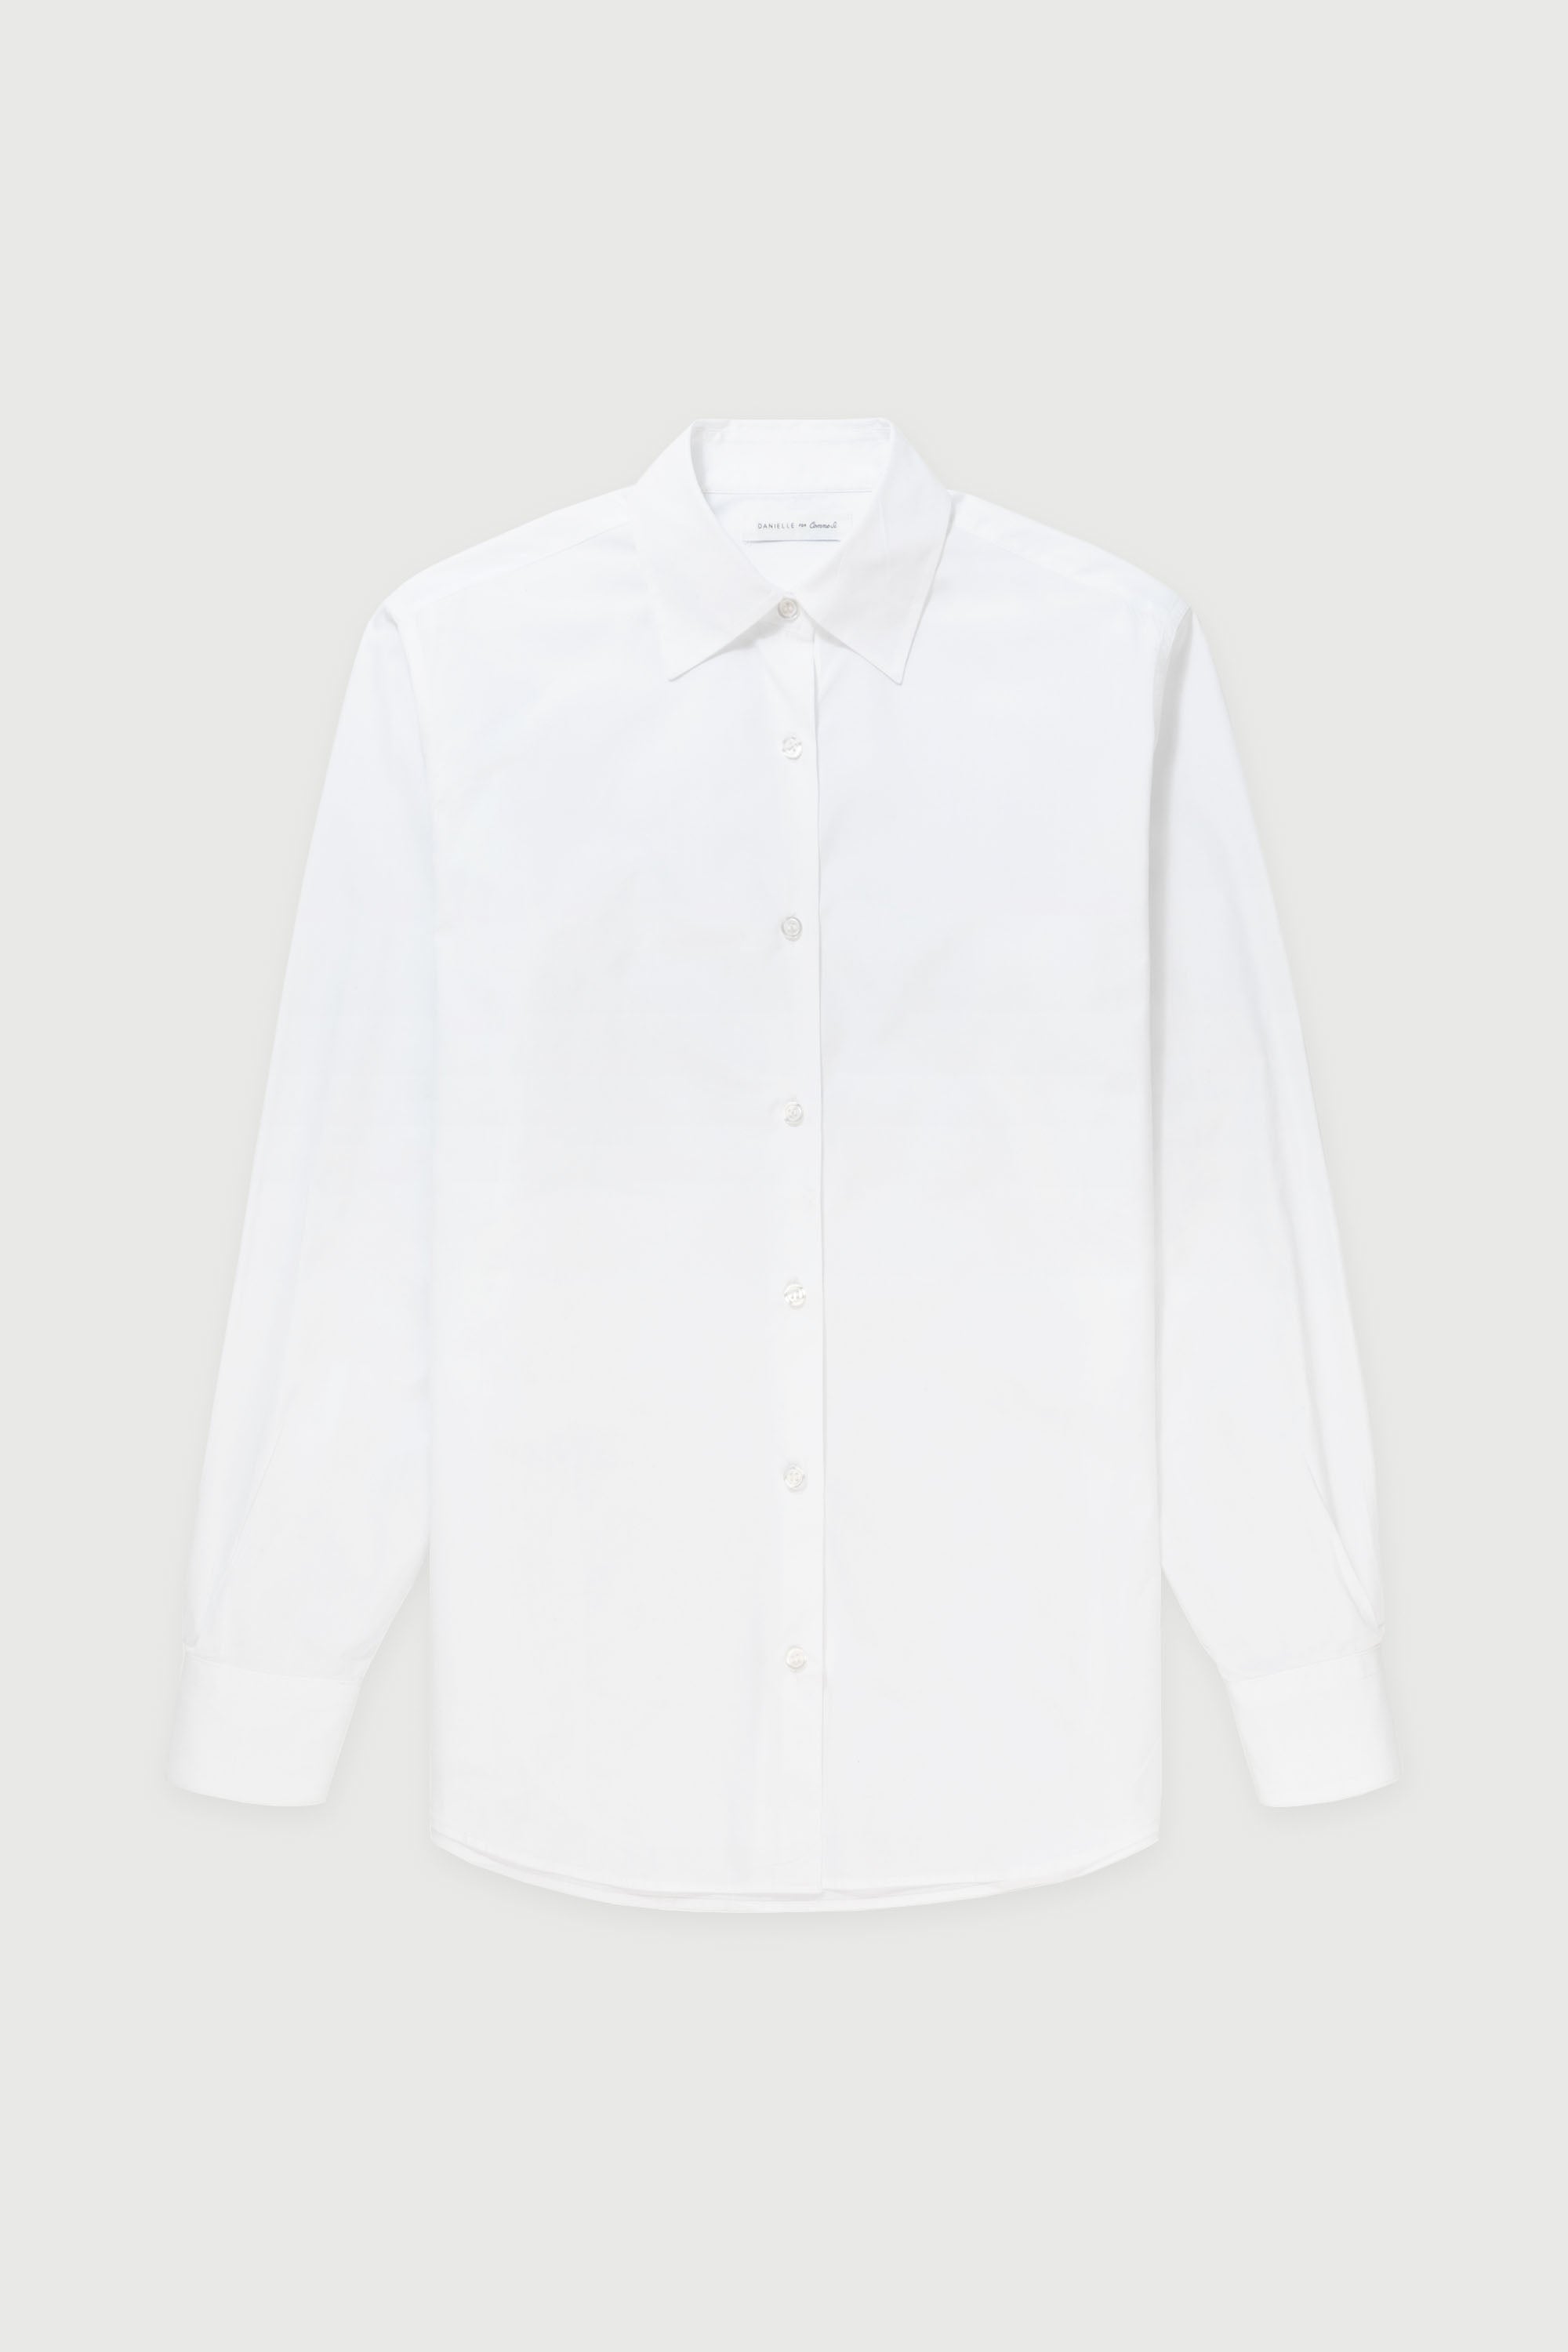 The Studio Shirt in White - Danielle for Comme Si